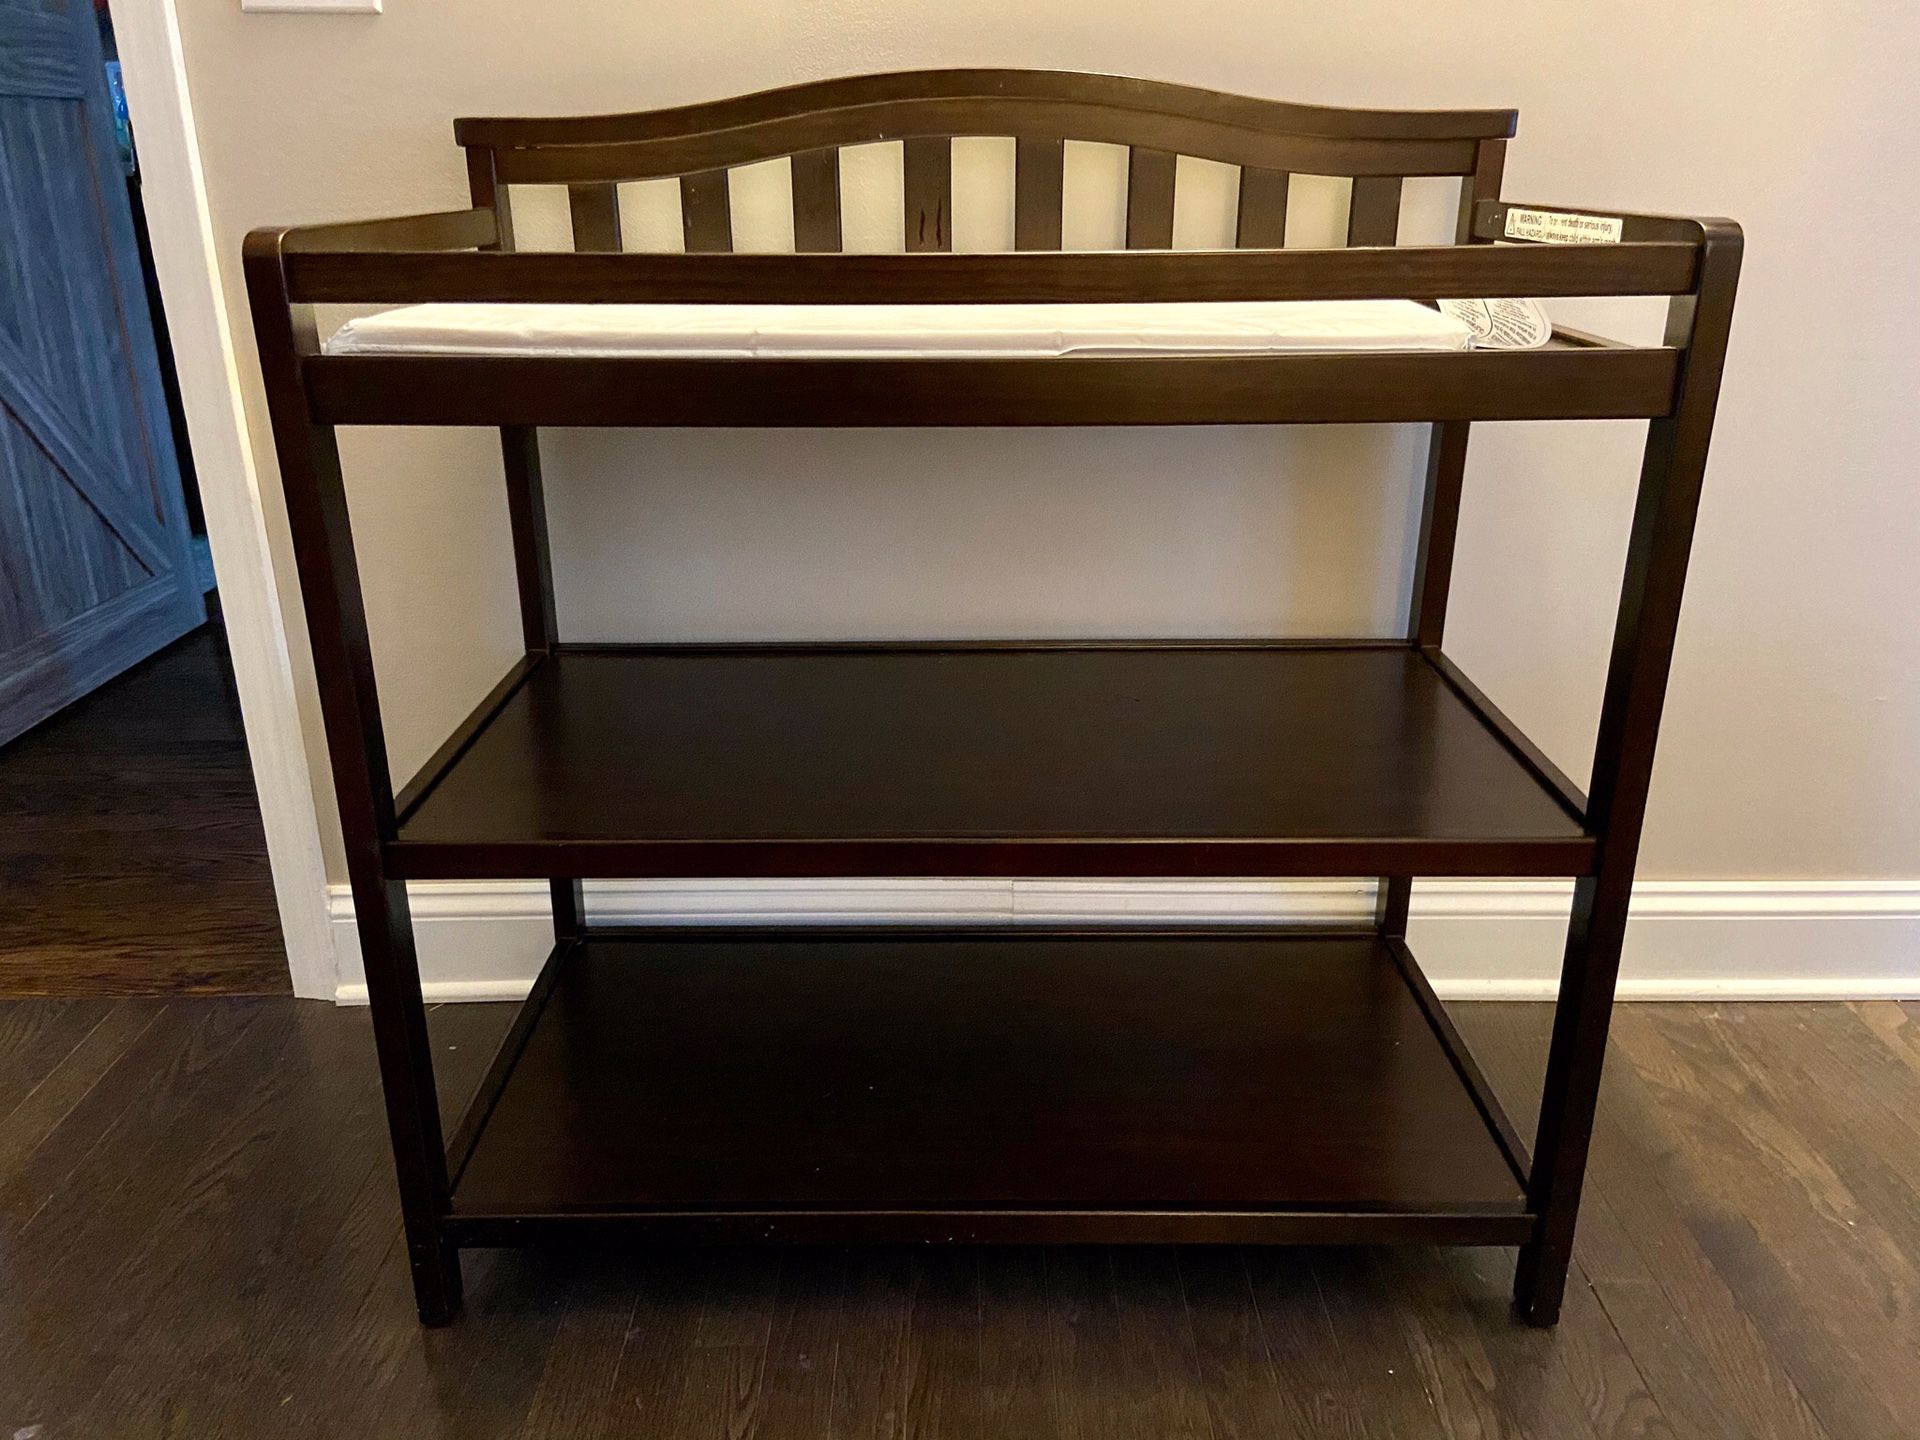 Changing table w/pad